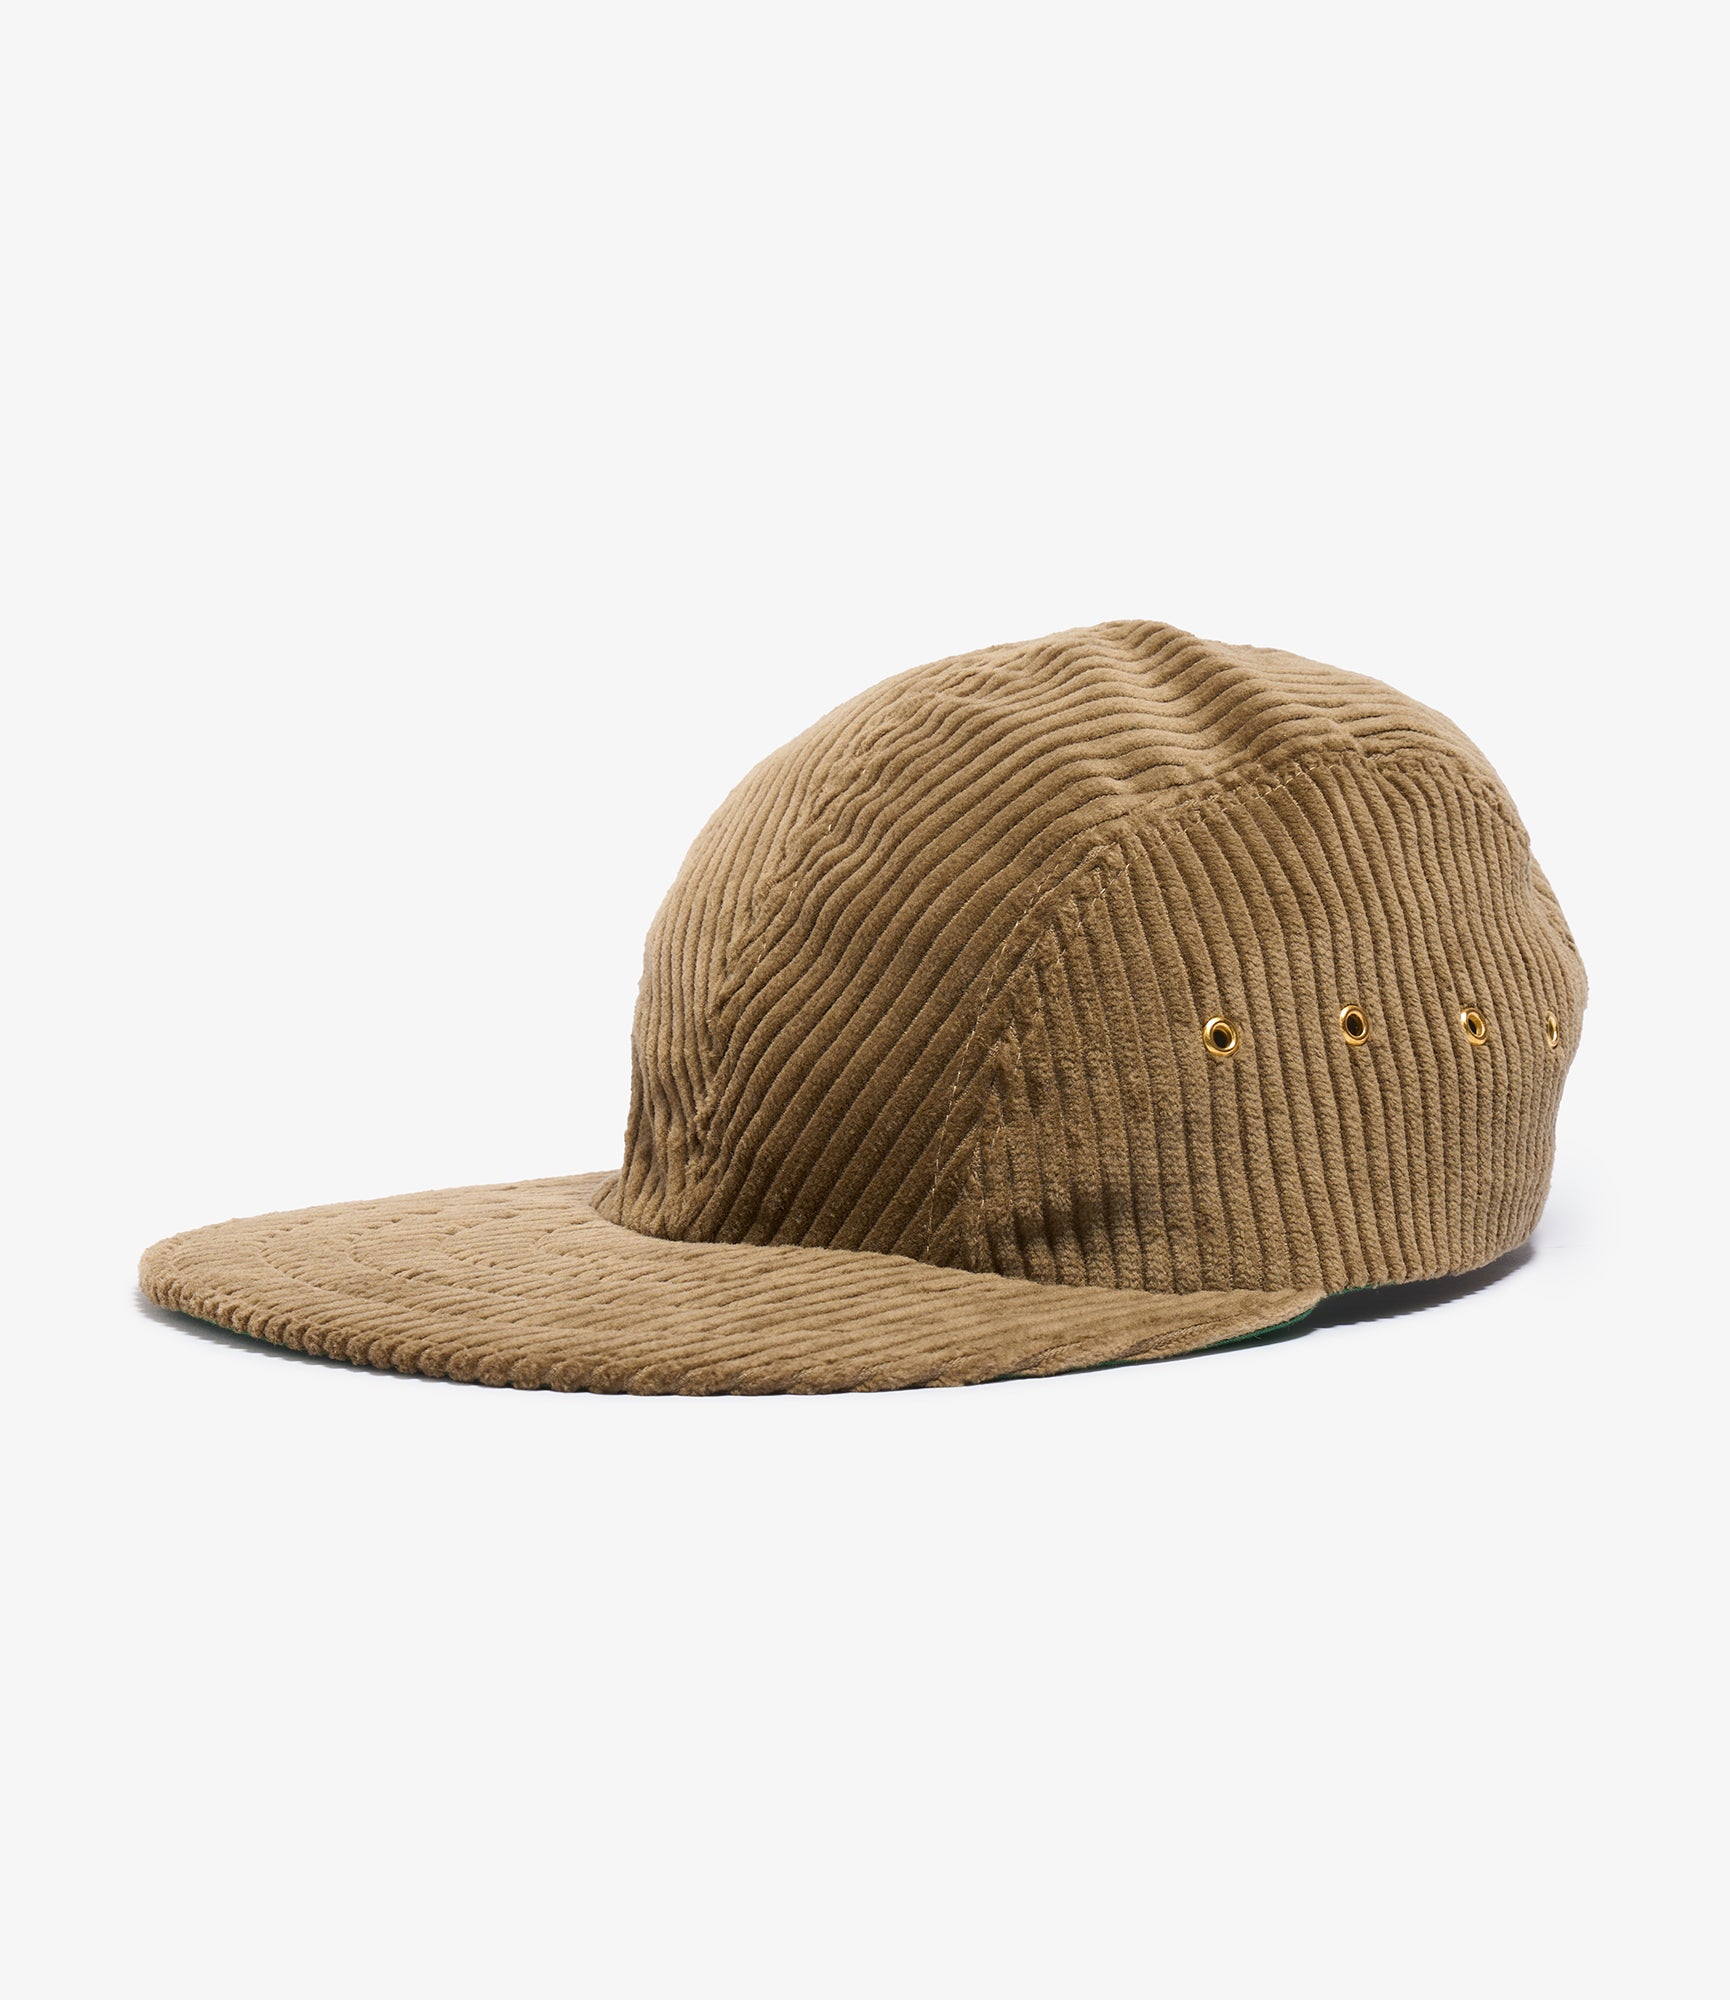 Hats | Nepenthes New York